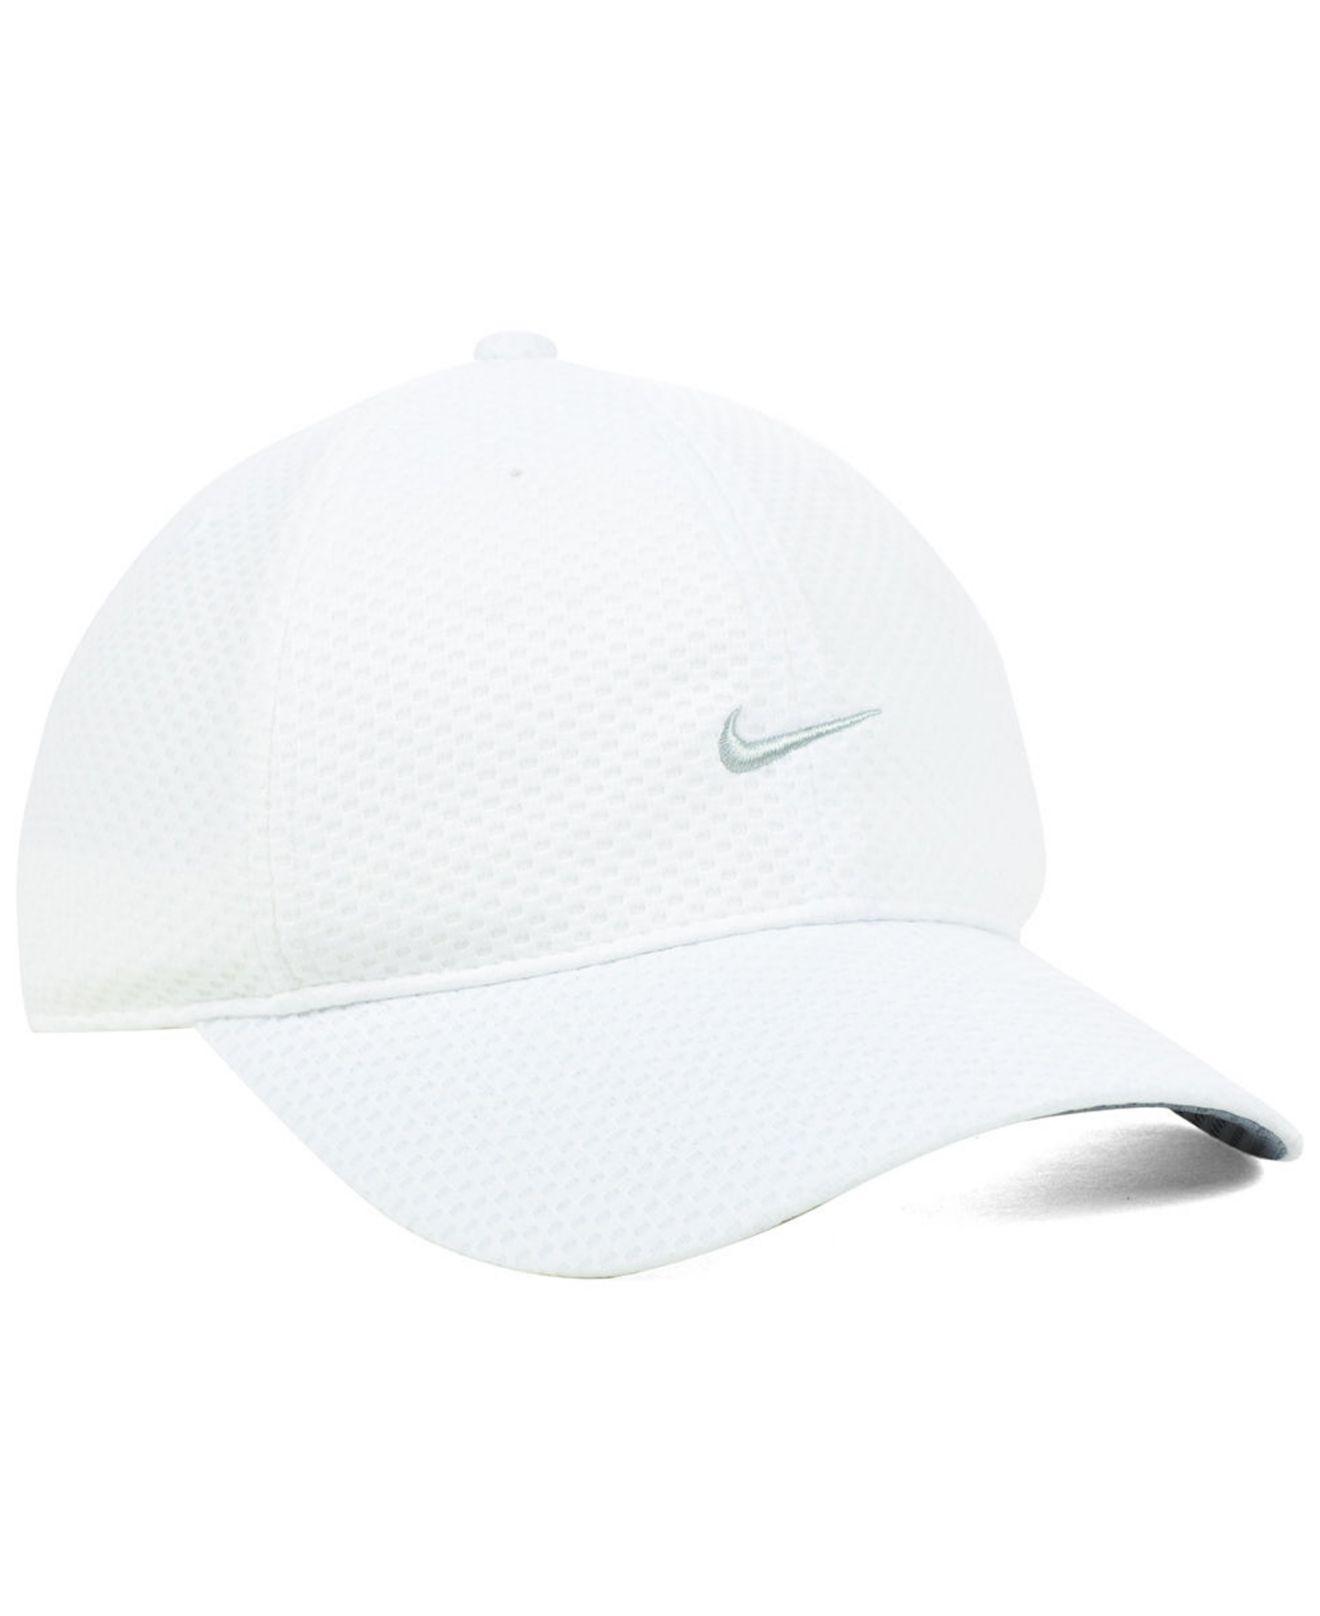 Nike Synthetic 6 Panel Tailwind Cap in White/Gray (White) for Men - Lyst